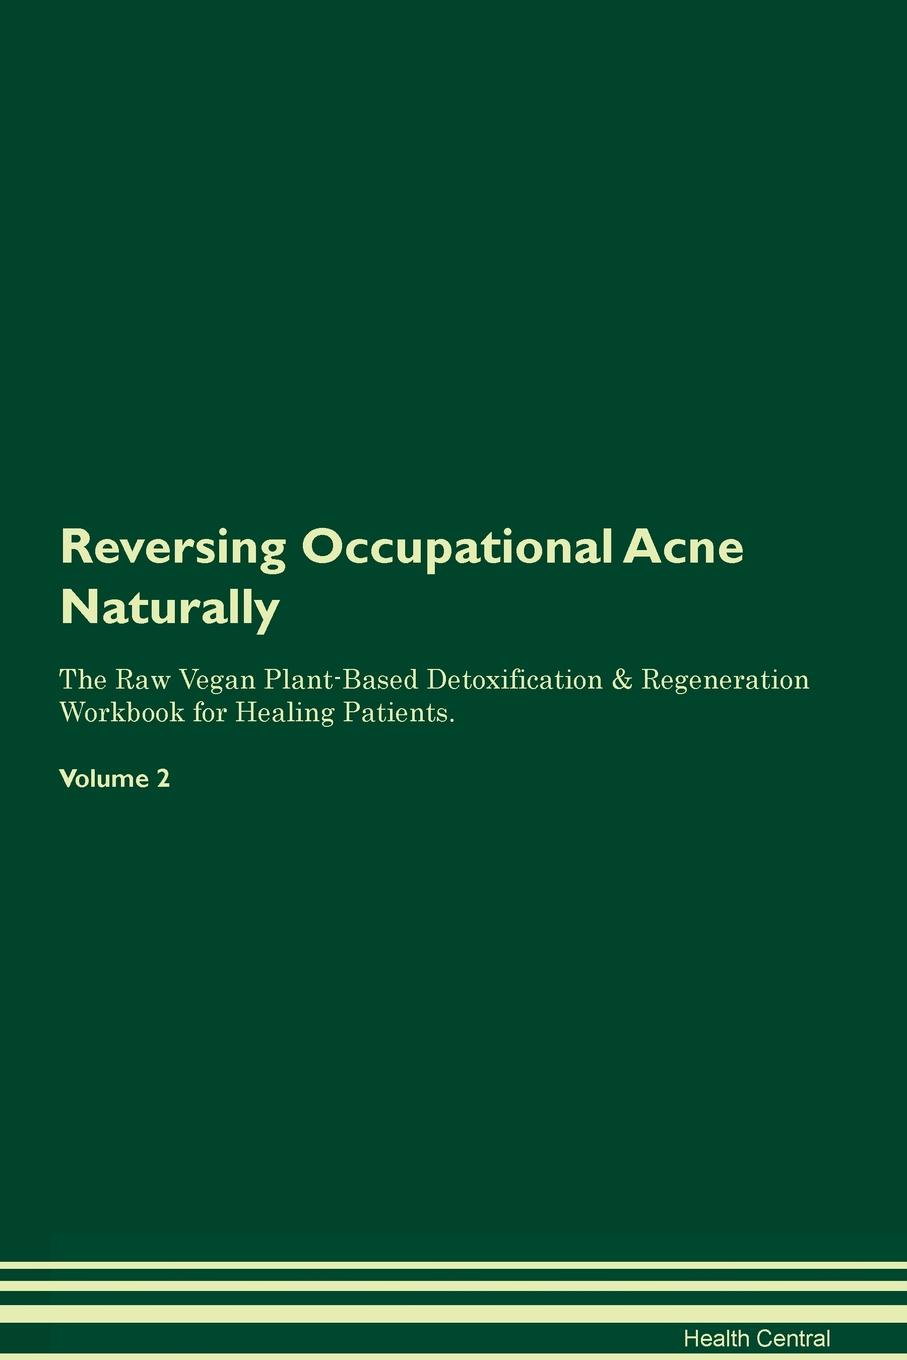 Reversing Occupational Acne Naturally The Raw Vegan Plant-Based Detoxification & Regeneration Workbook for Healing Patients. Volume 2